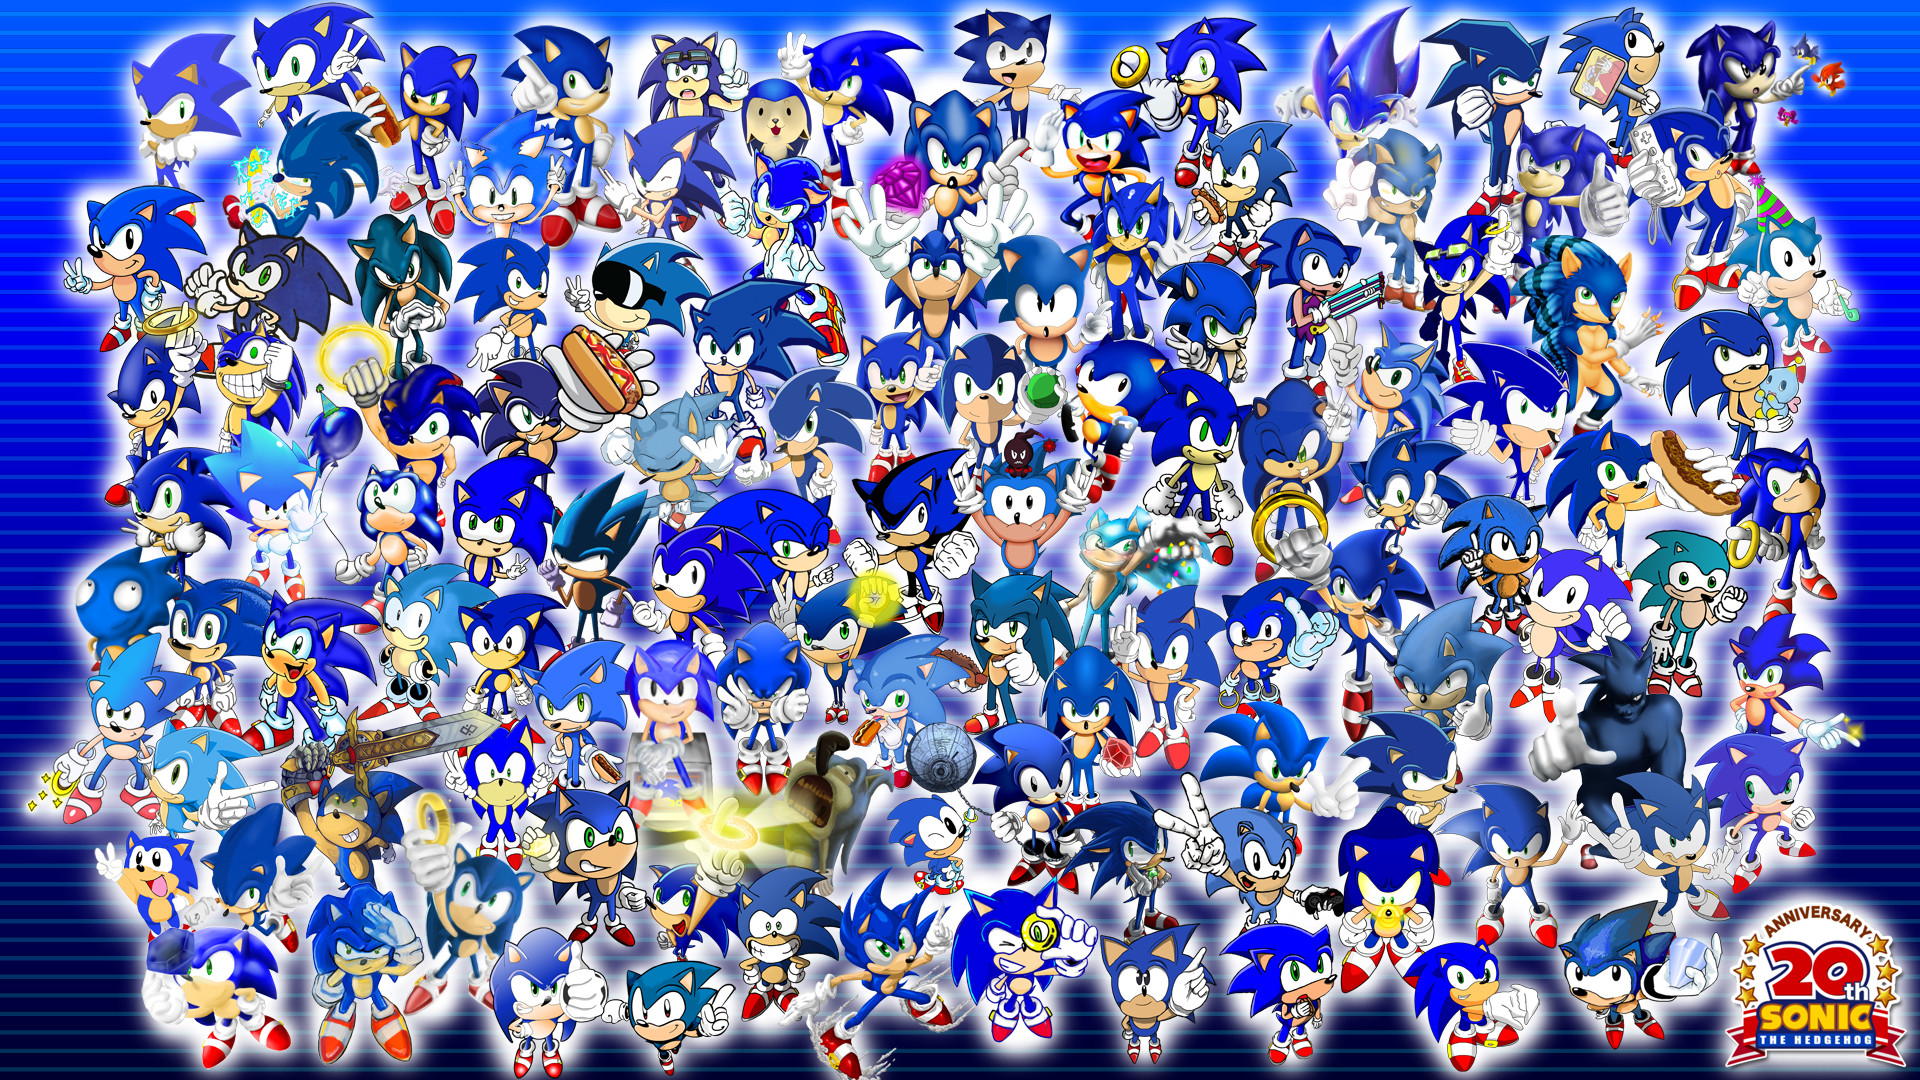 1920x1080 sonic the hedgehog 20 wallpaper Project 20 Sonic Wallpaper - Sonic the  Hedgehog Wallpaper (28705122